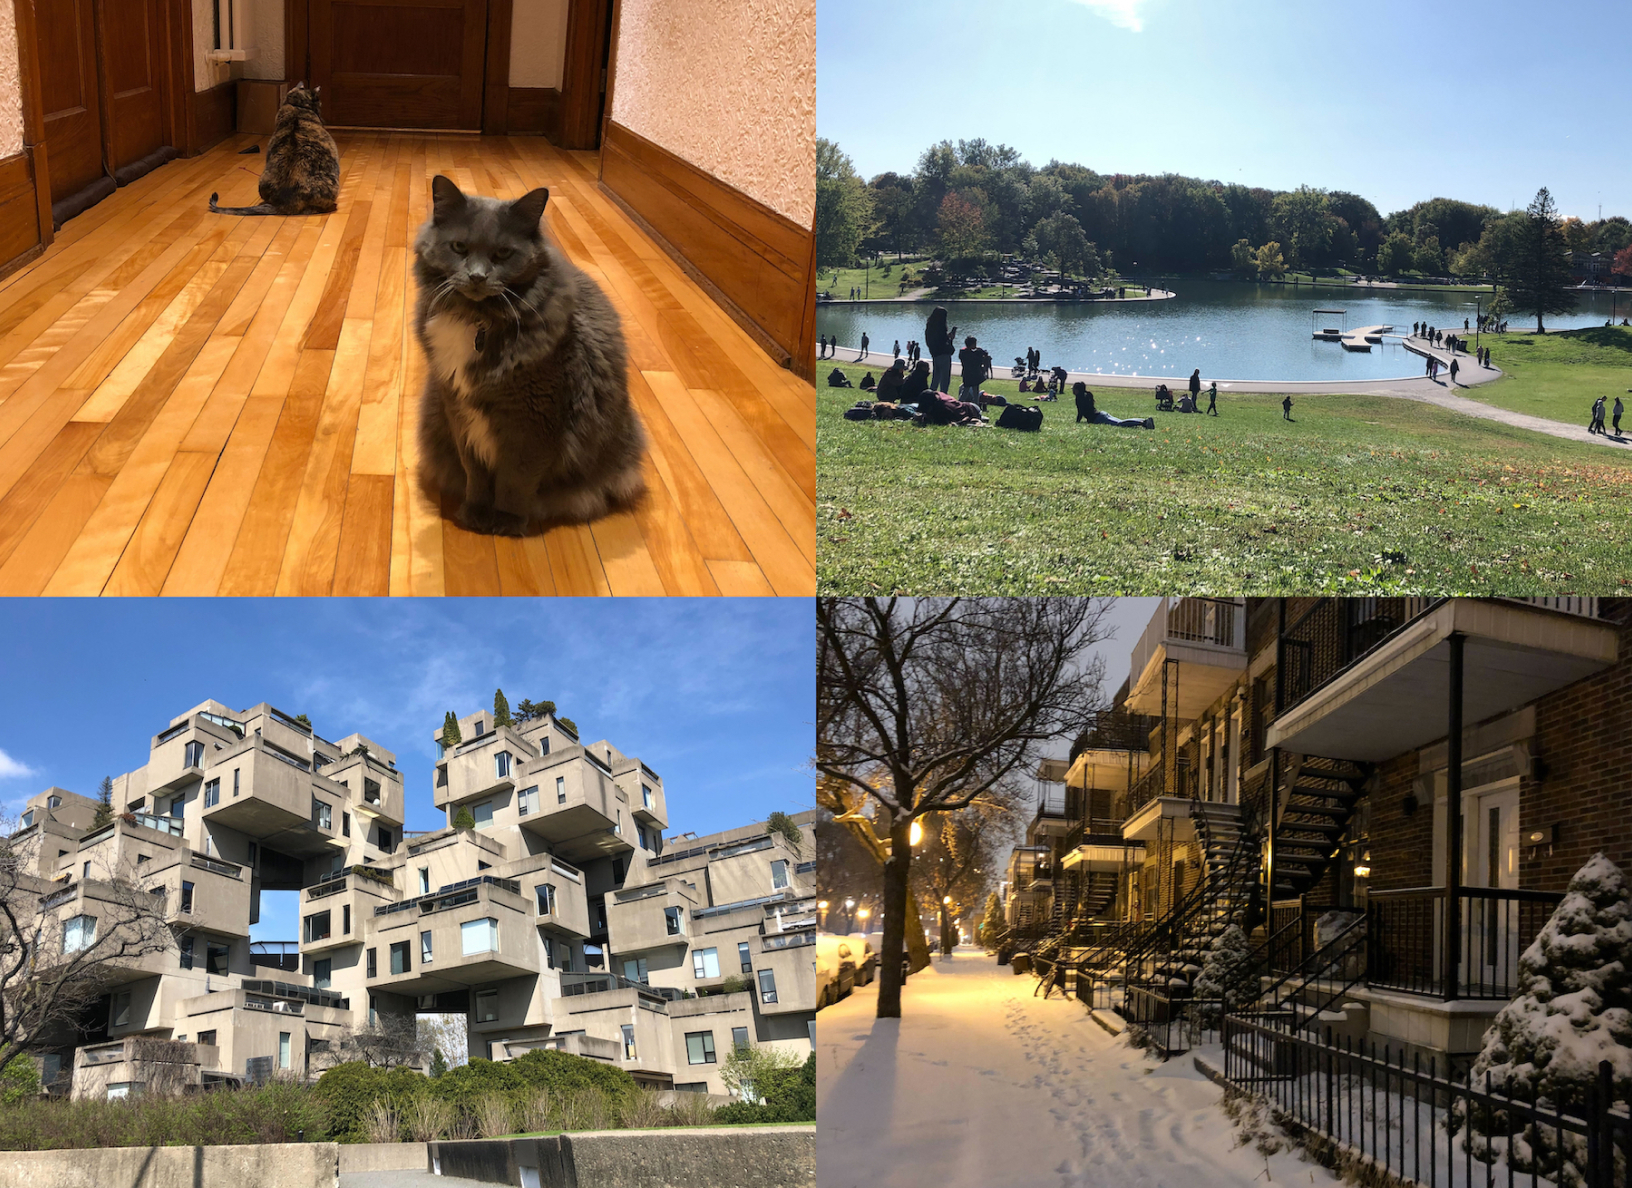 Photos taken from Satomi’s time in Montreal, Canada